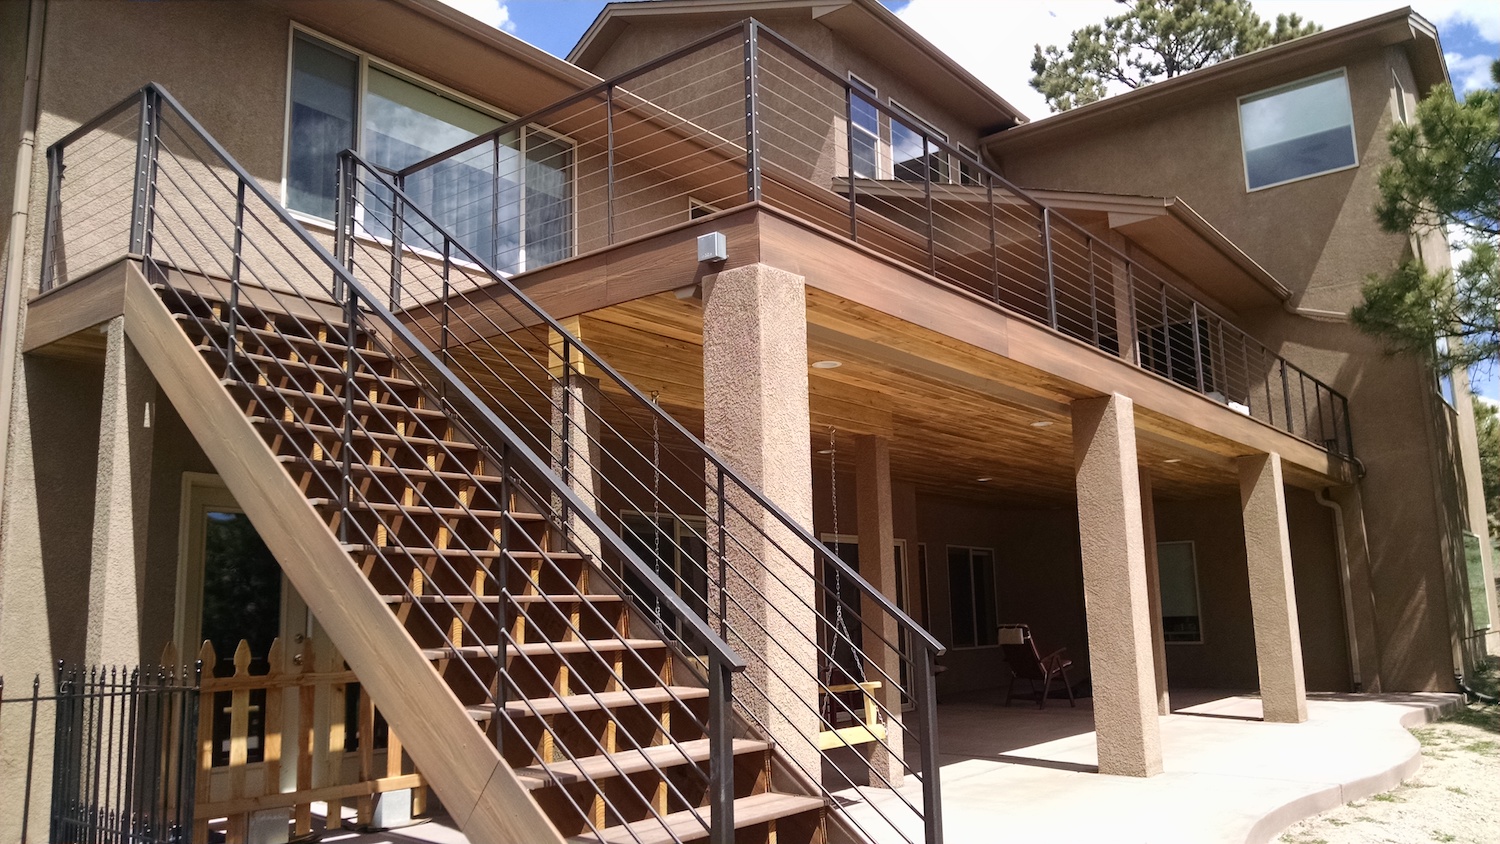 Elevated composite deck with custom deck railing. Trex RainEscape system added